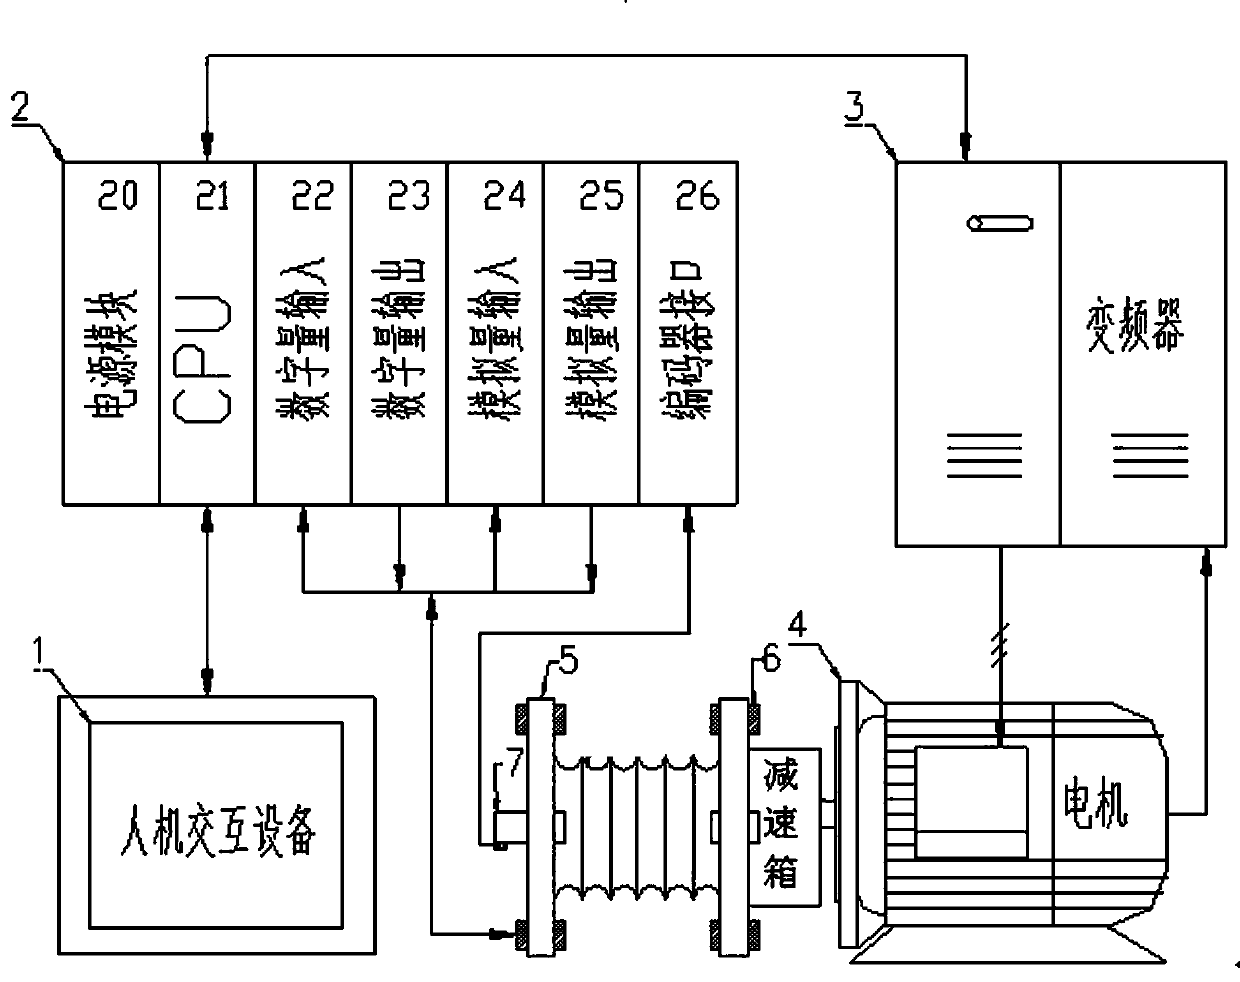 Intelligent test system and method of hydraulic disk brake of petroleum drilling machine